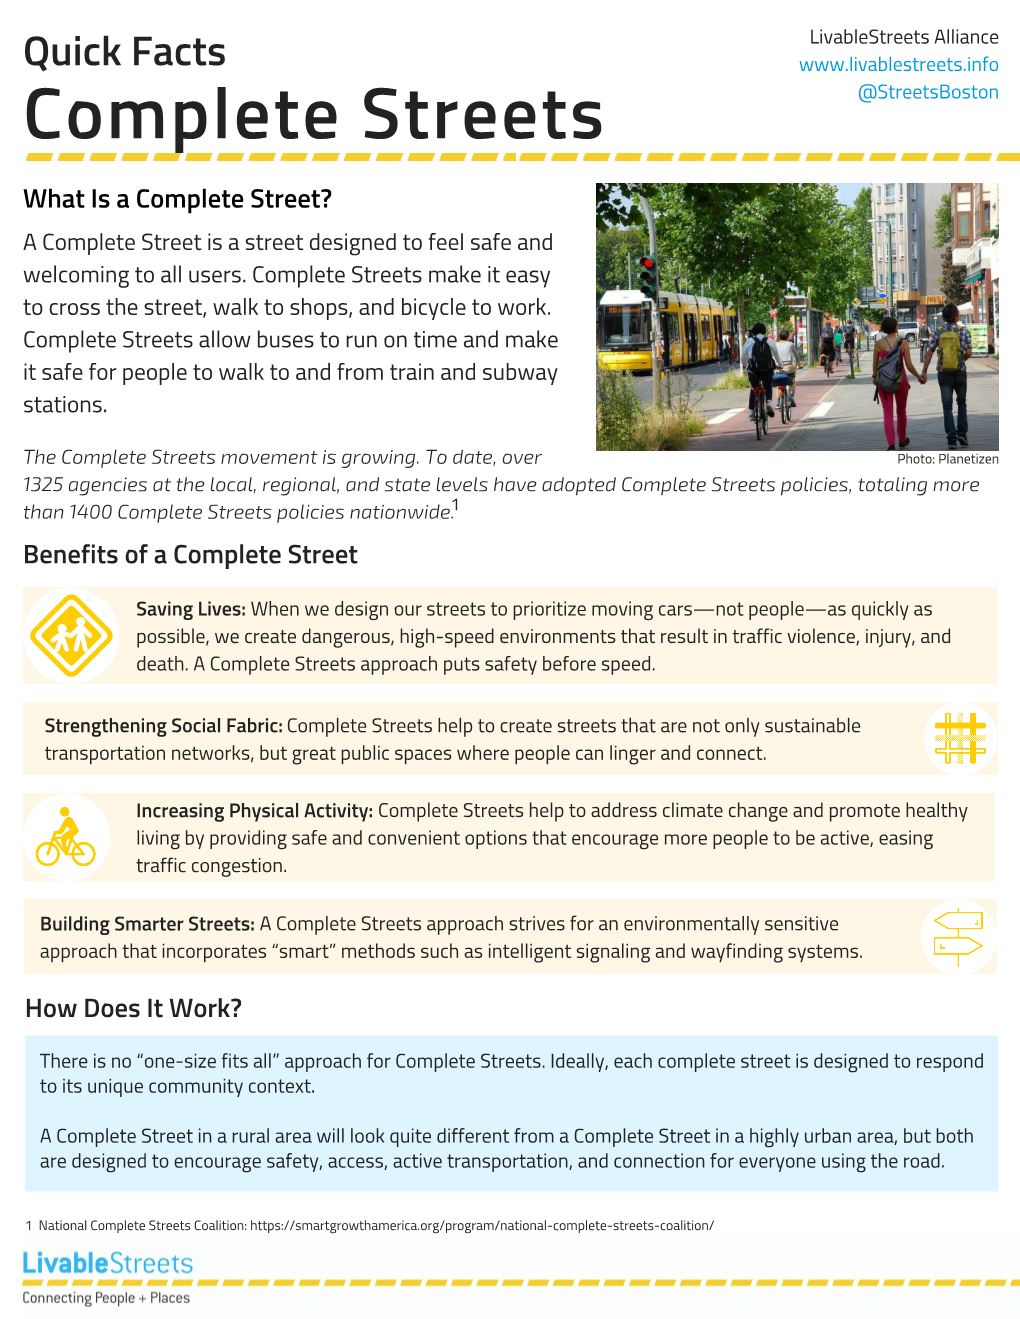 Complete Streets @Streetsboston What Is a Complete Street? a Complete Street Is a Street Designed to Feel Safe and Welcoming to All Users